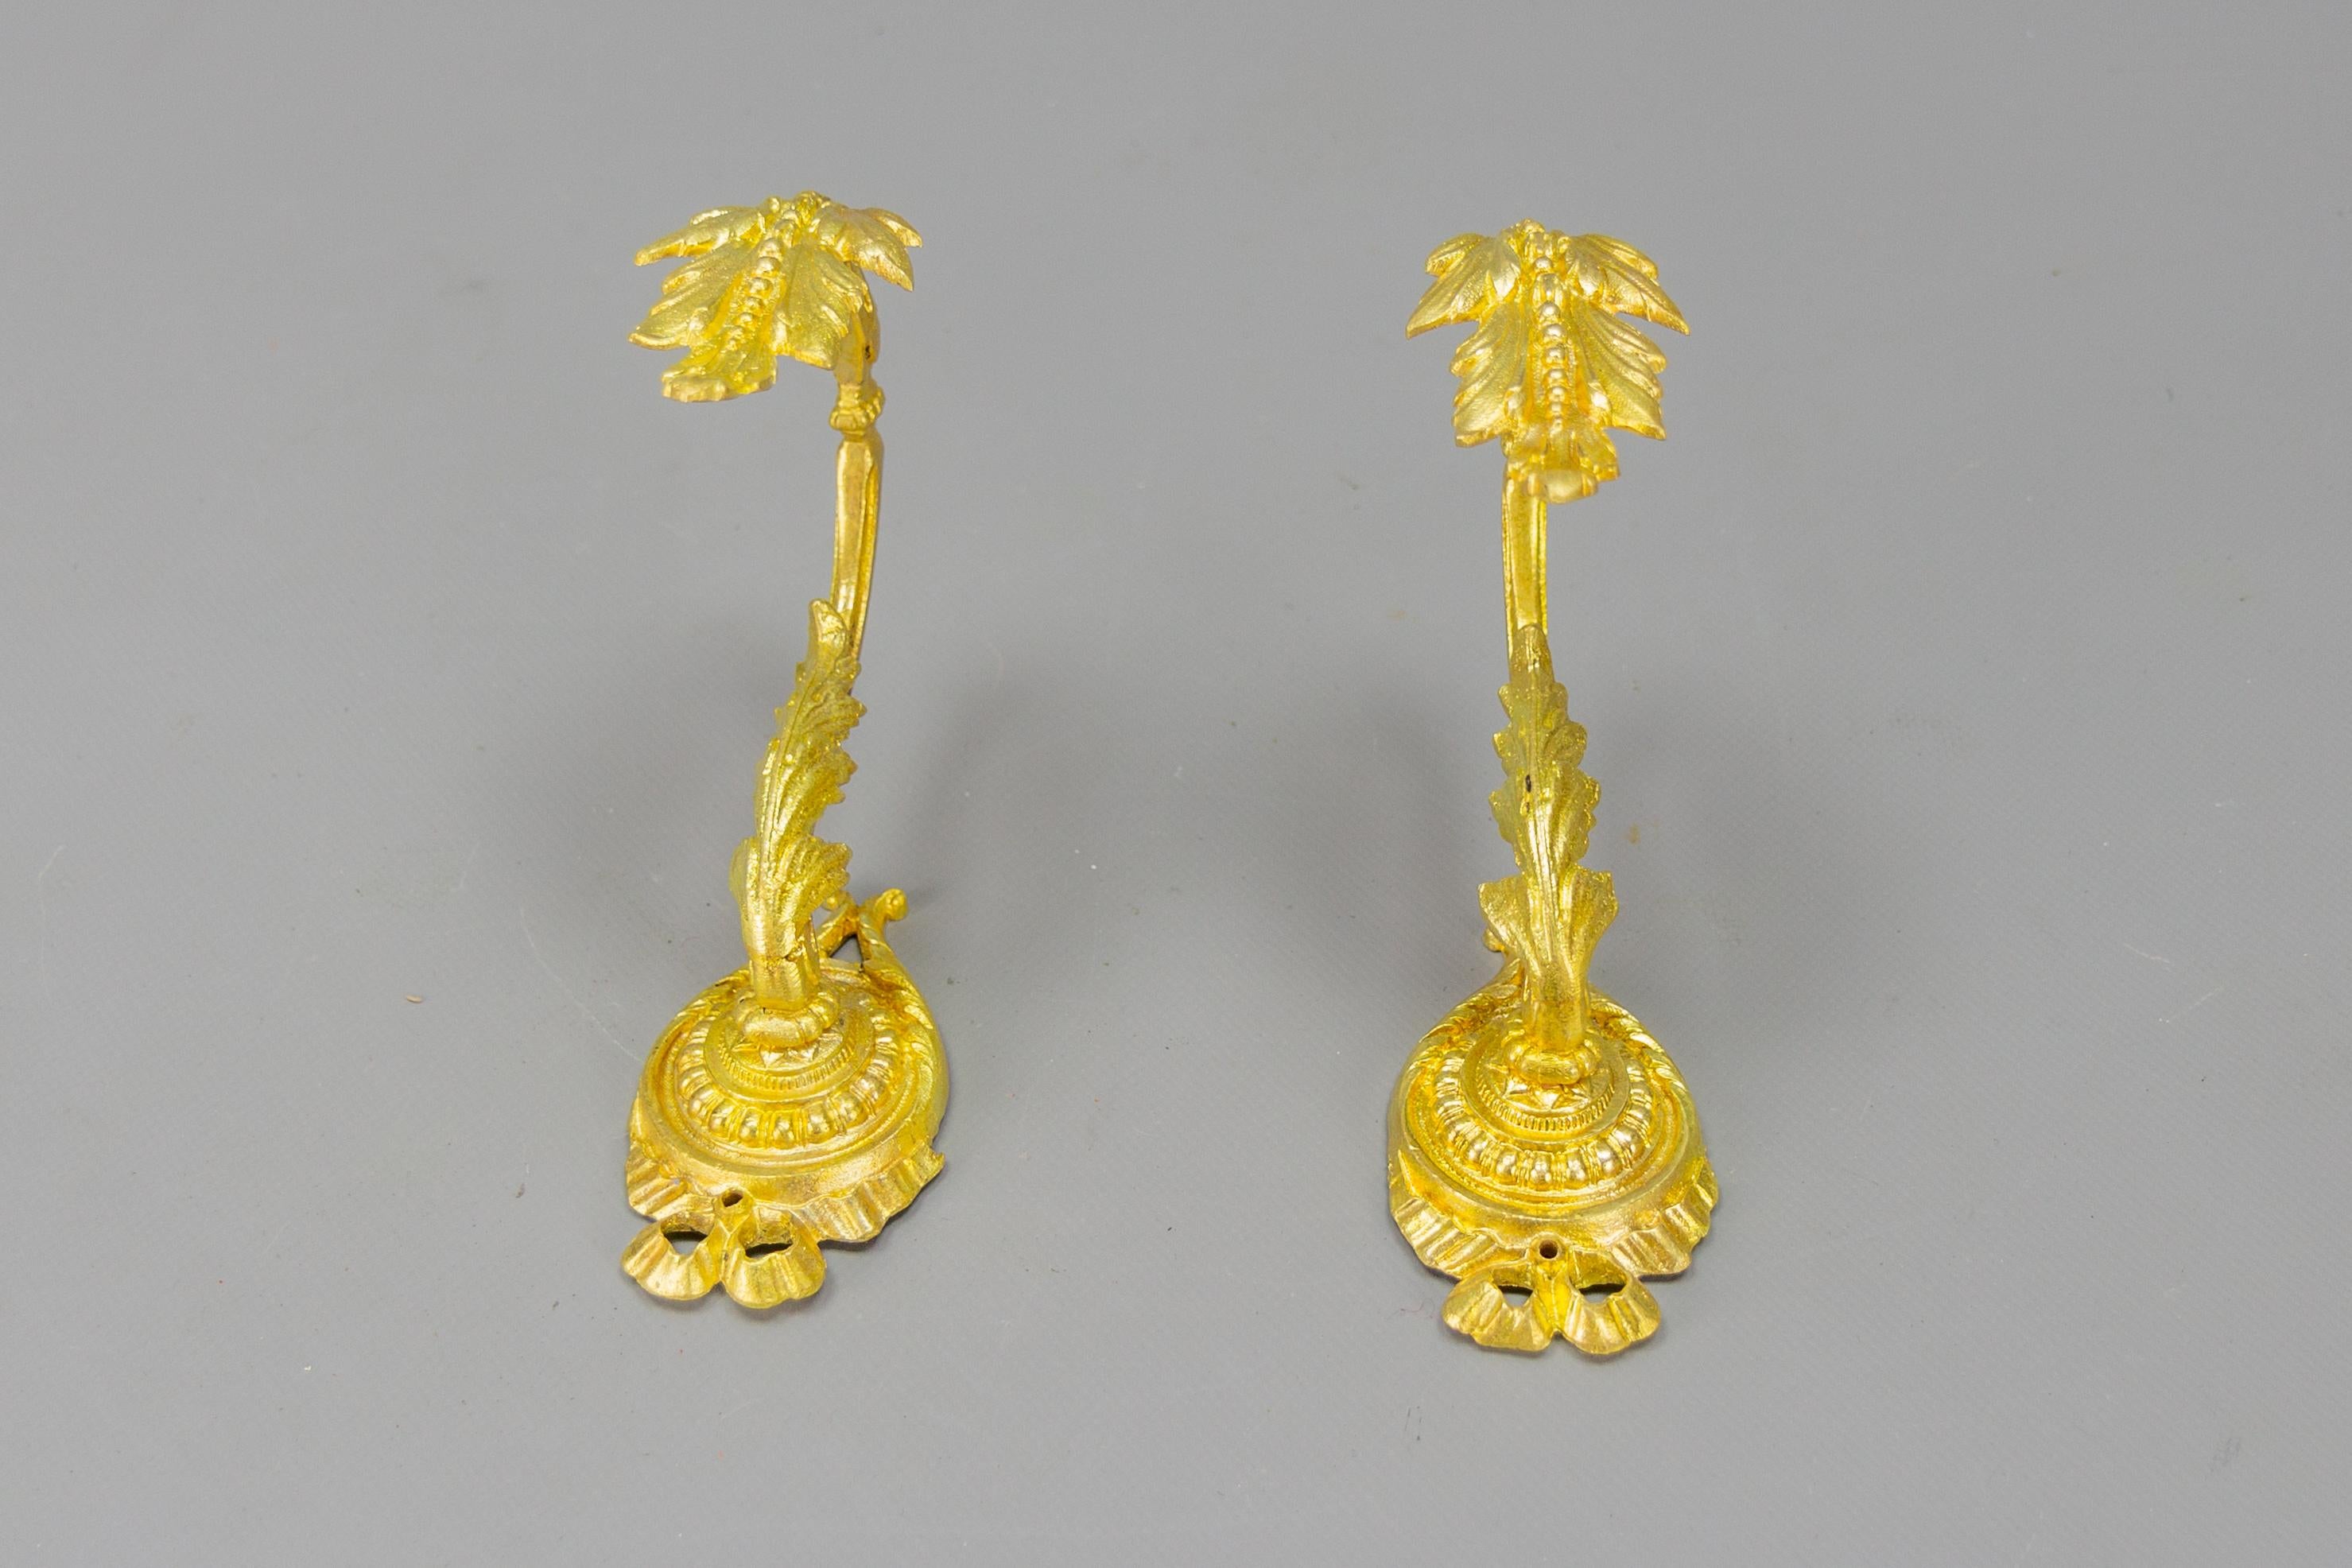 Pair of French Louis XIV Style Gilt Bronze Curtain Tiebacks or Curtain Holders For Sale 5